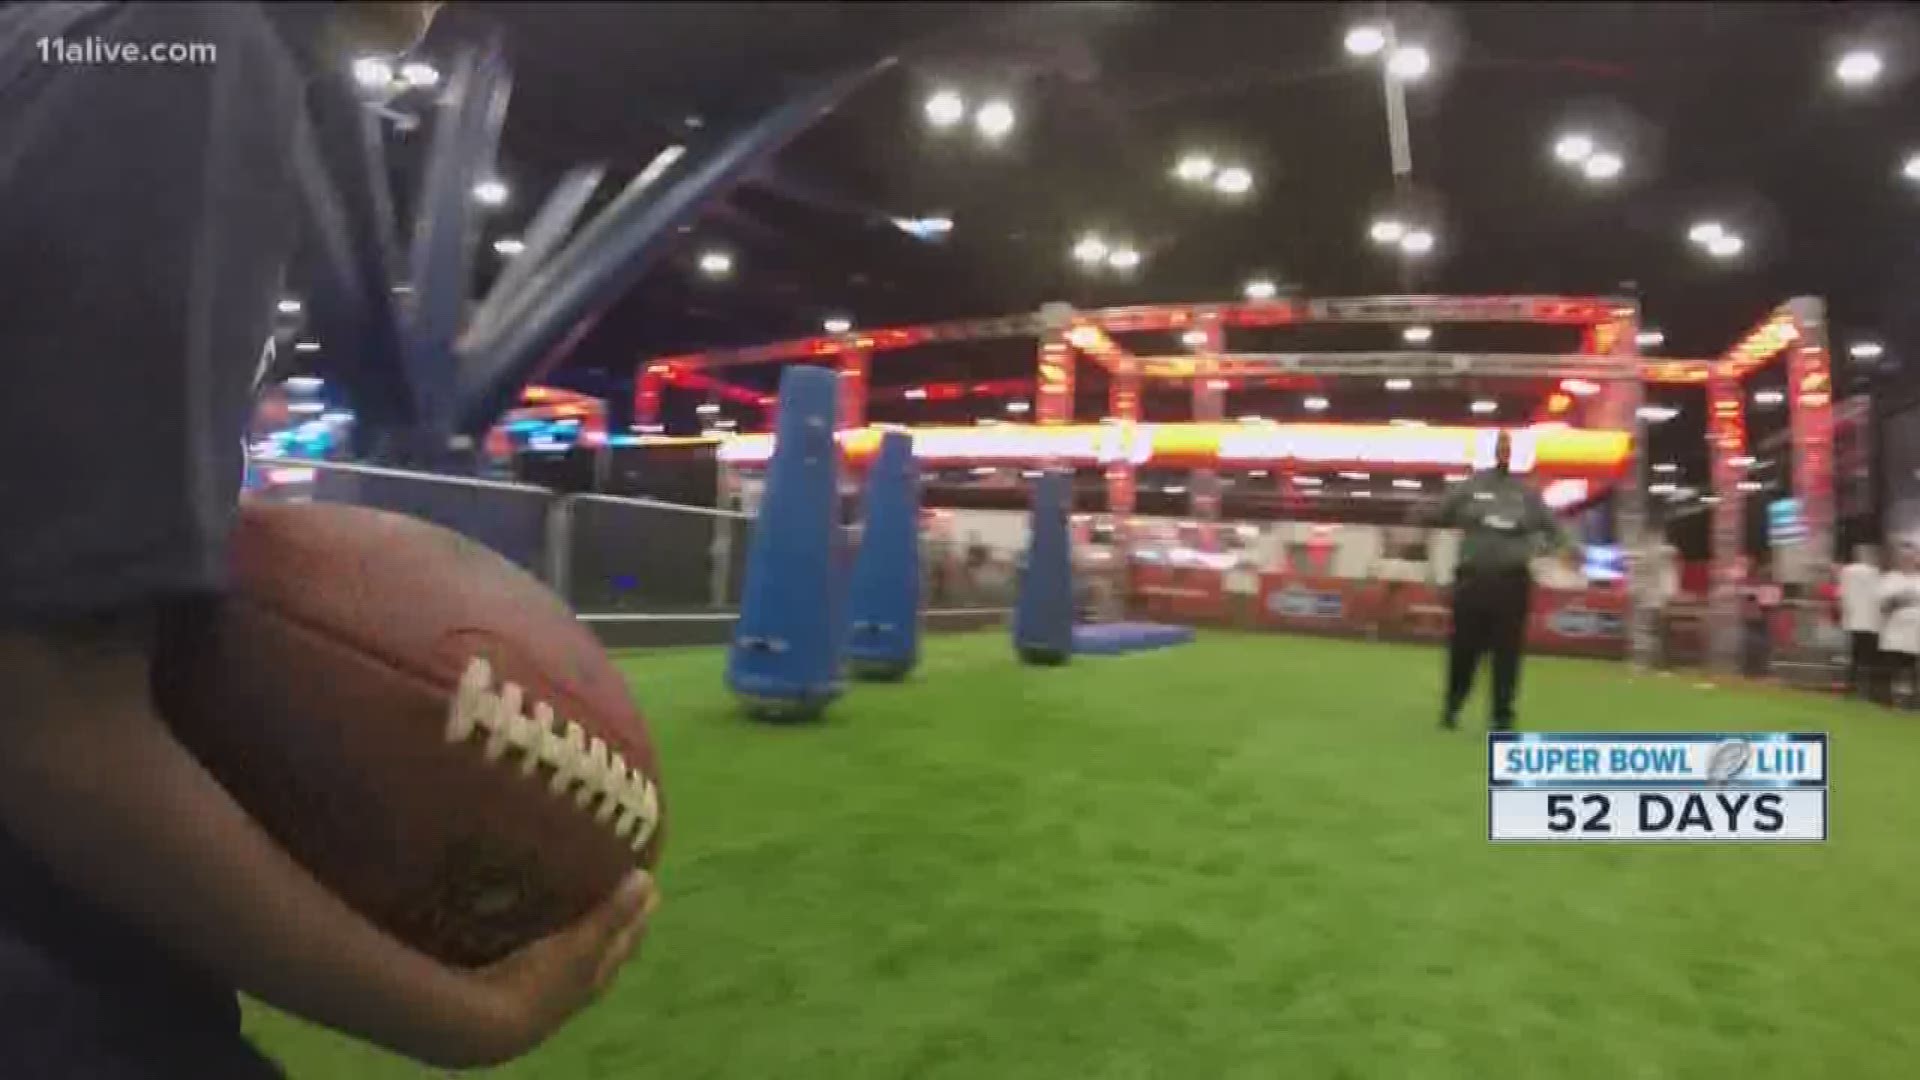 It's like a theme park ... but with NFL players.